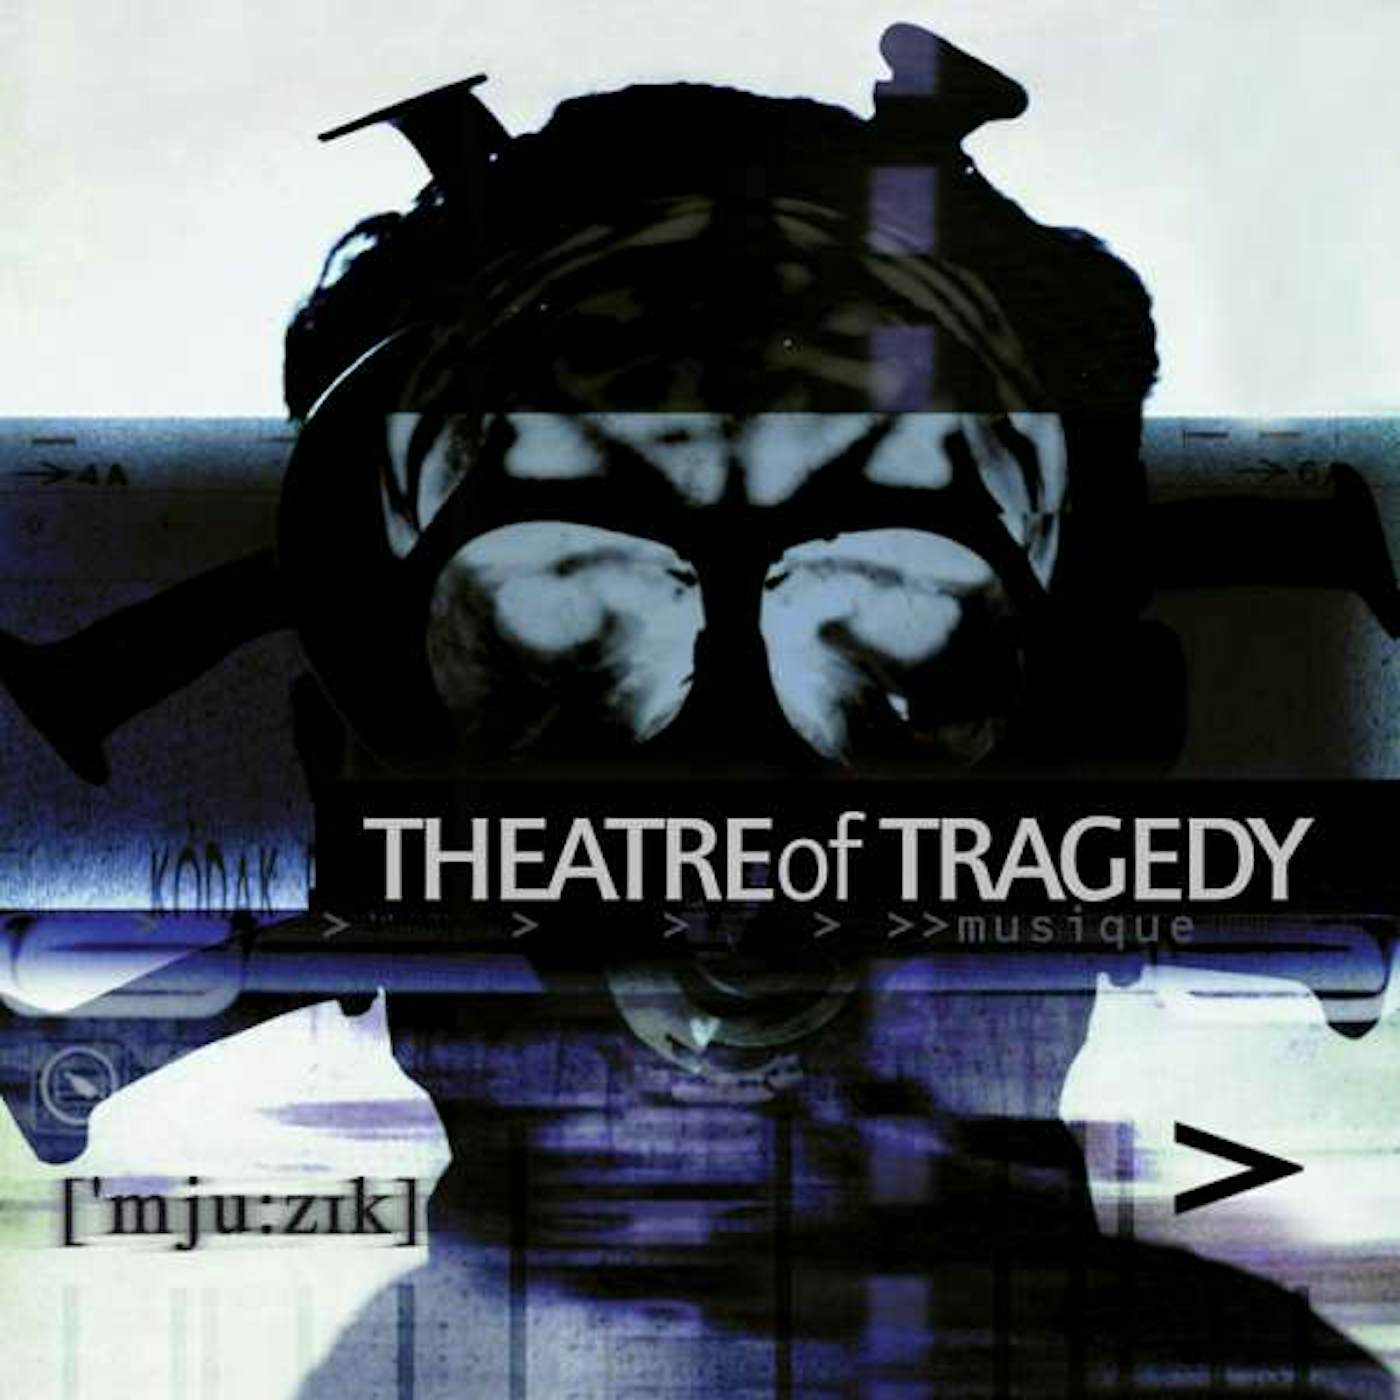 THEATRE OF TRAGEDY CD